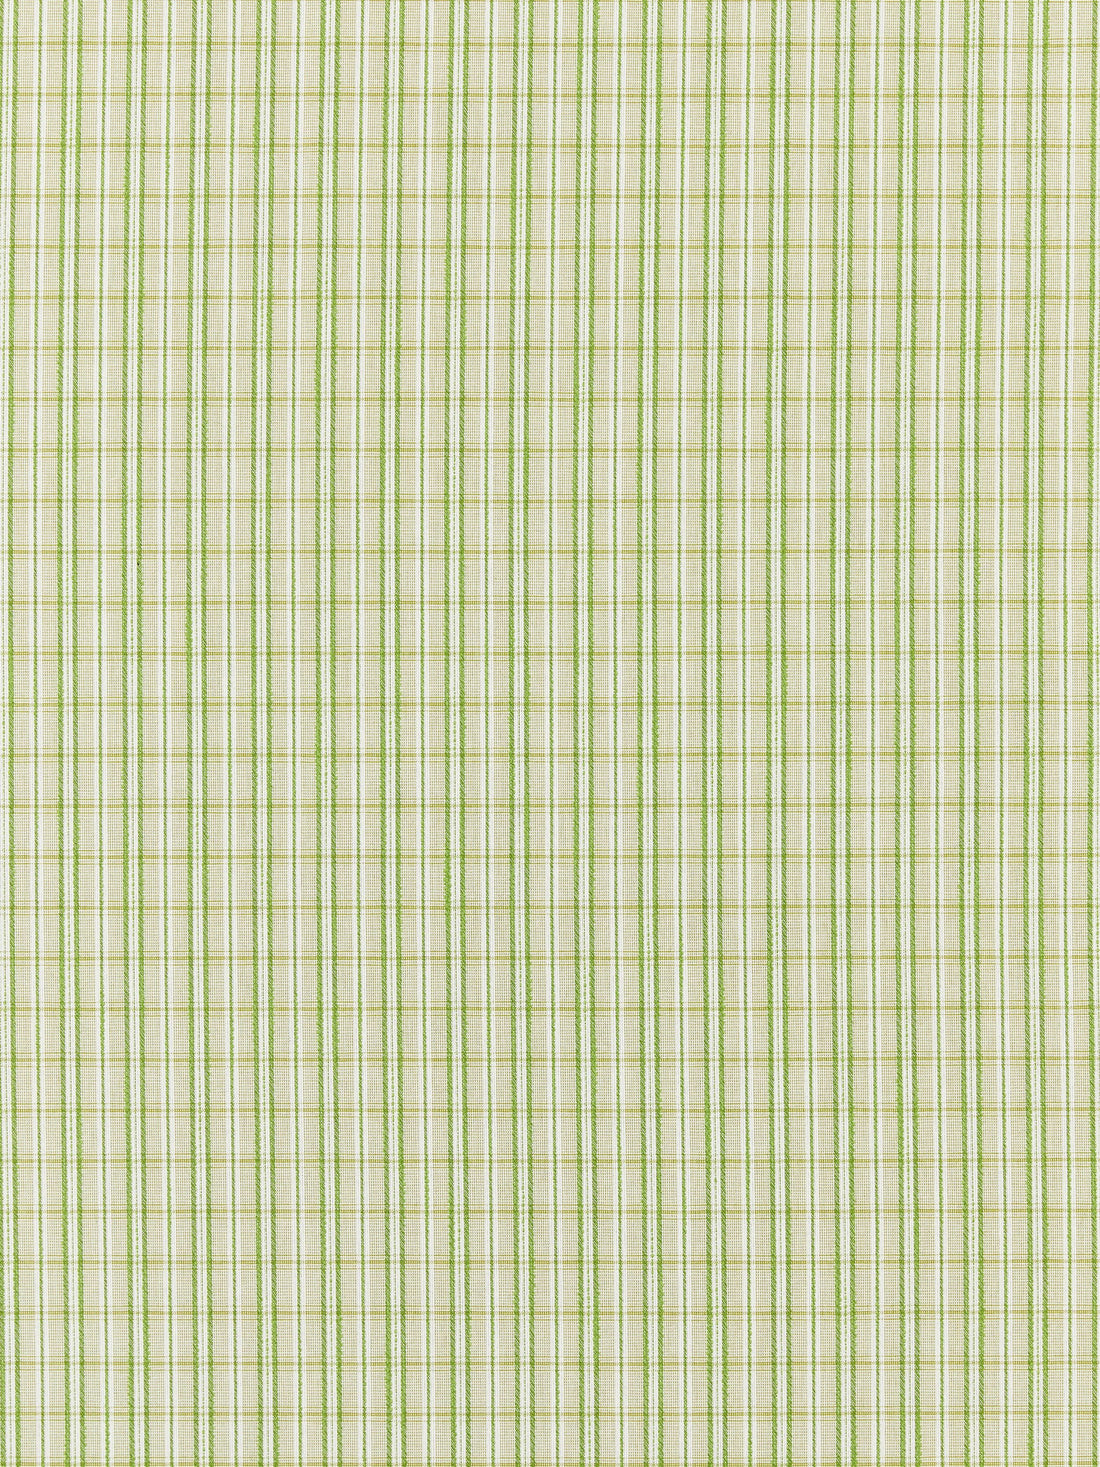 Check Please Outdoor fabric in fern color - pattern number SC 000327318 - by Scalamandre in the Scalamandre Fabrics Book 1 collection